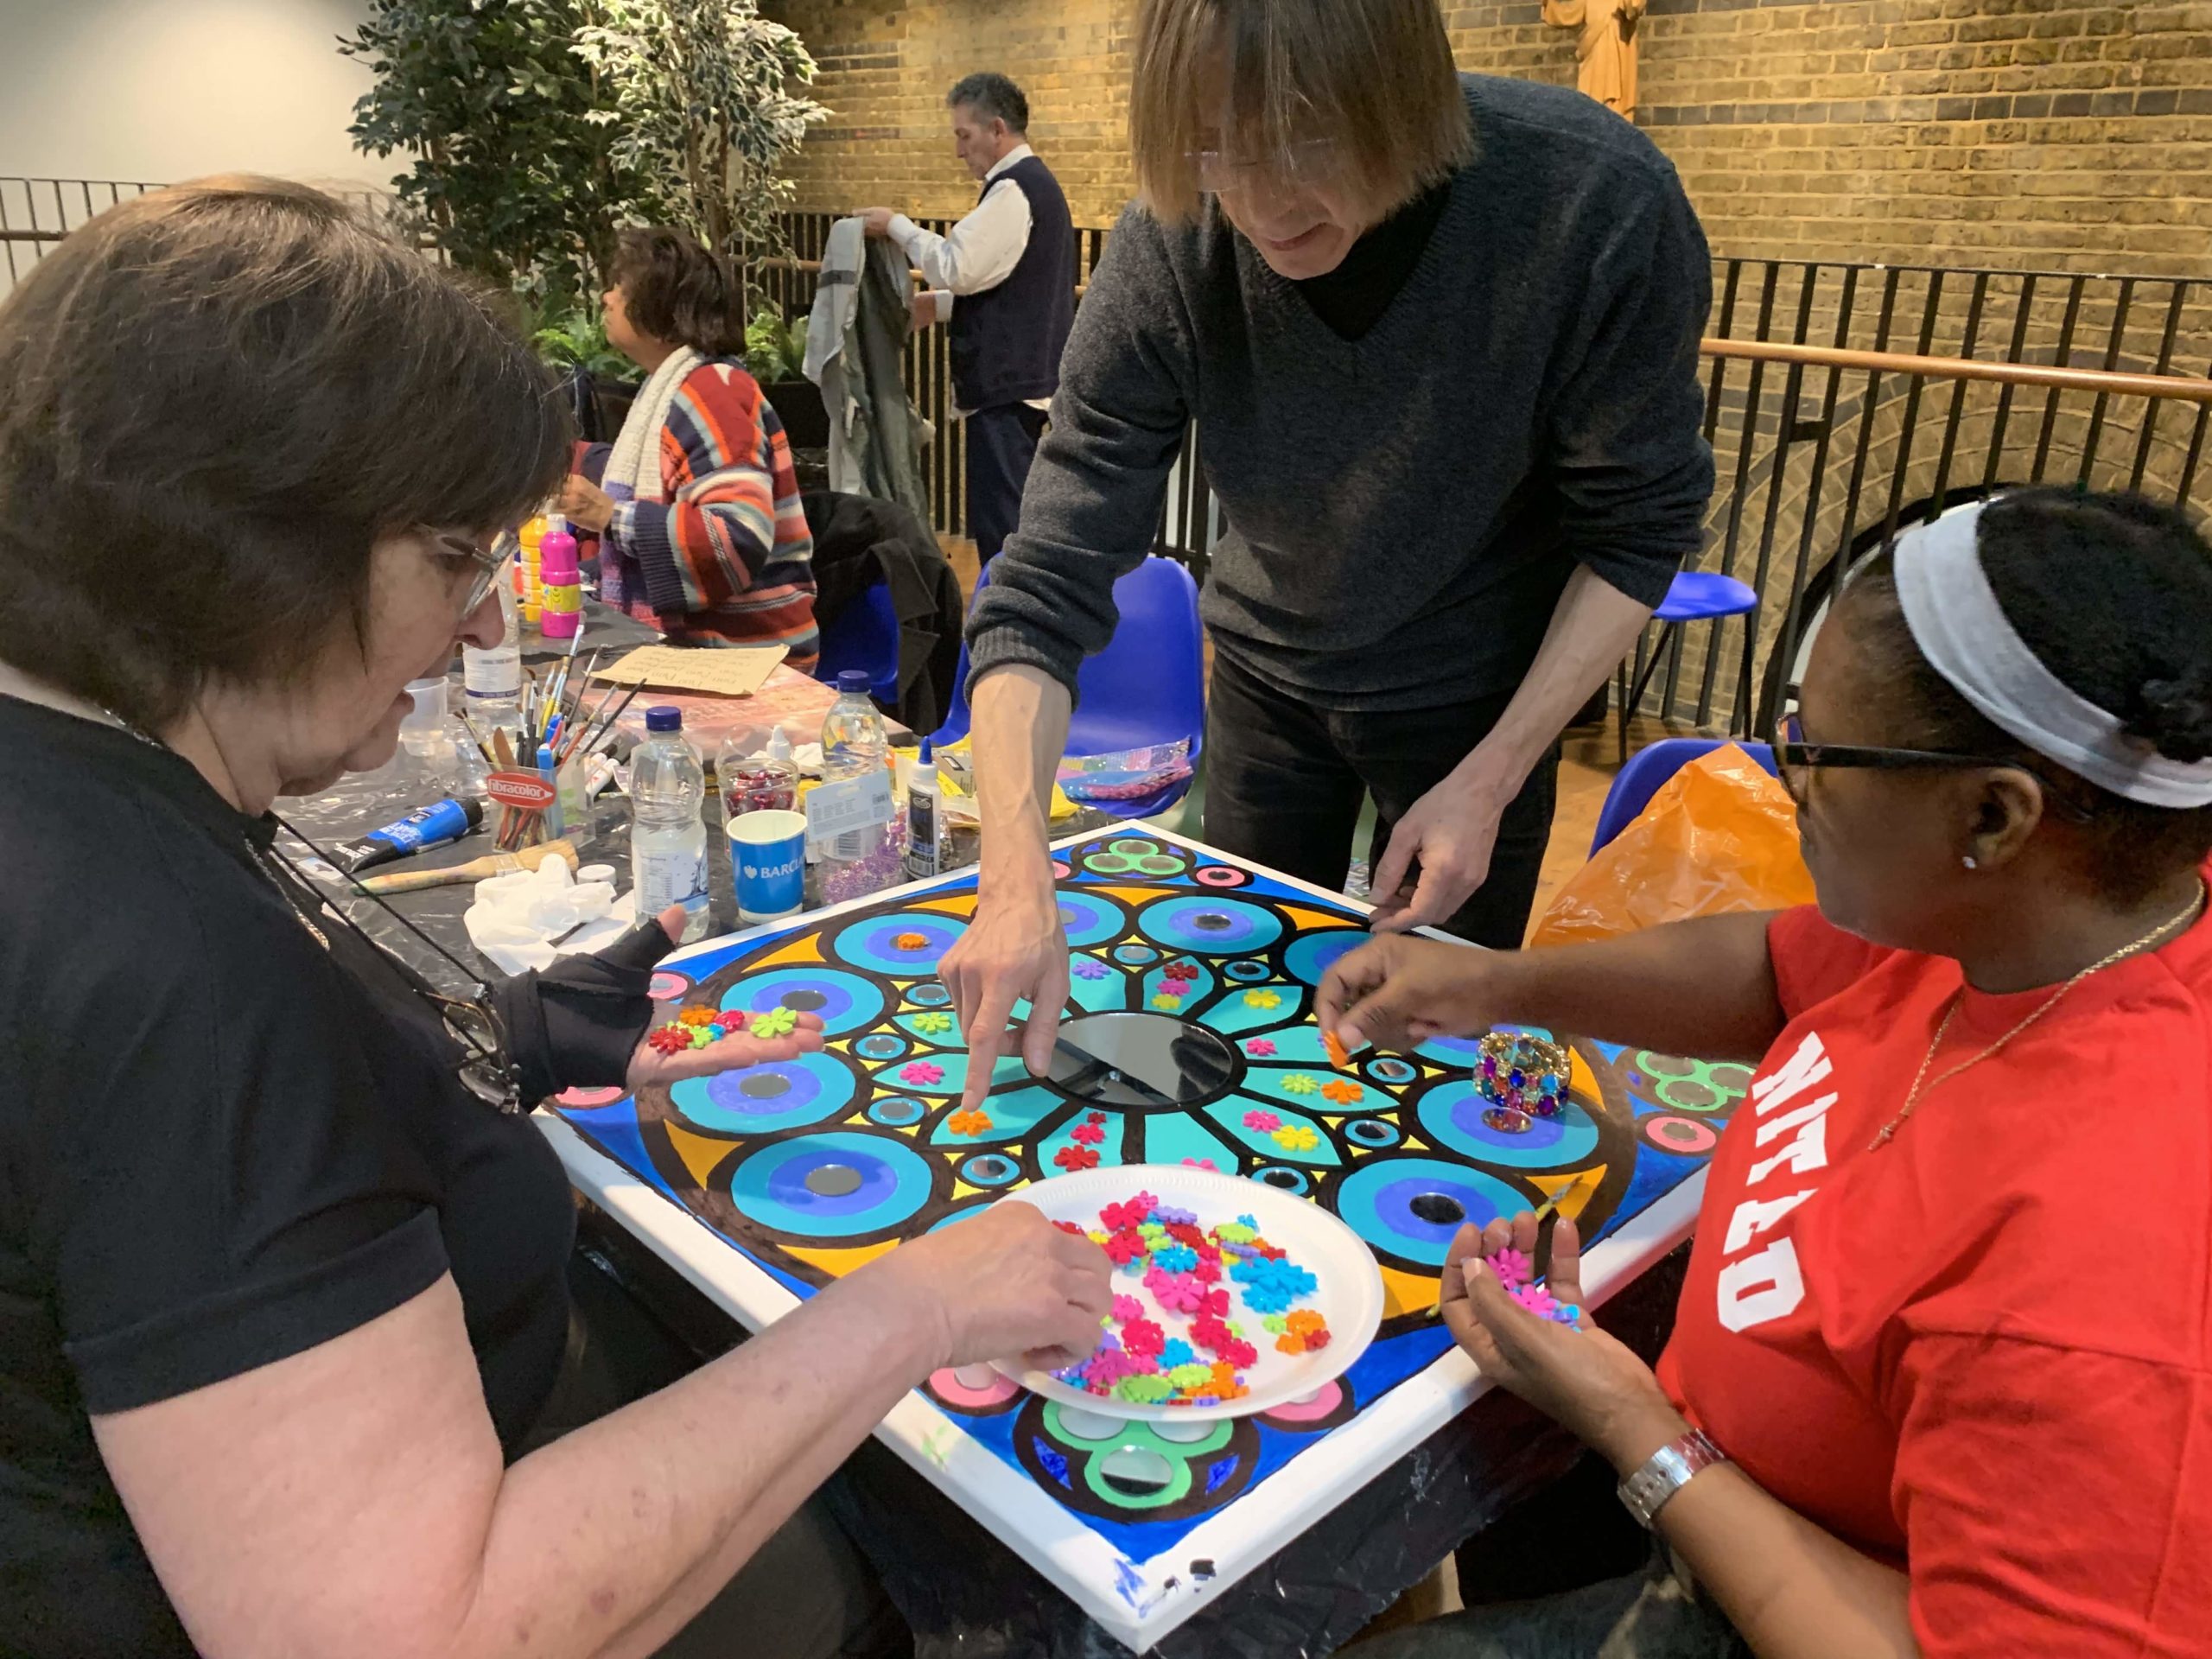 An art therapy class at The Passage. Image courtesy of The Passage